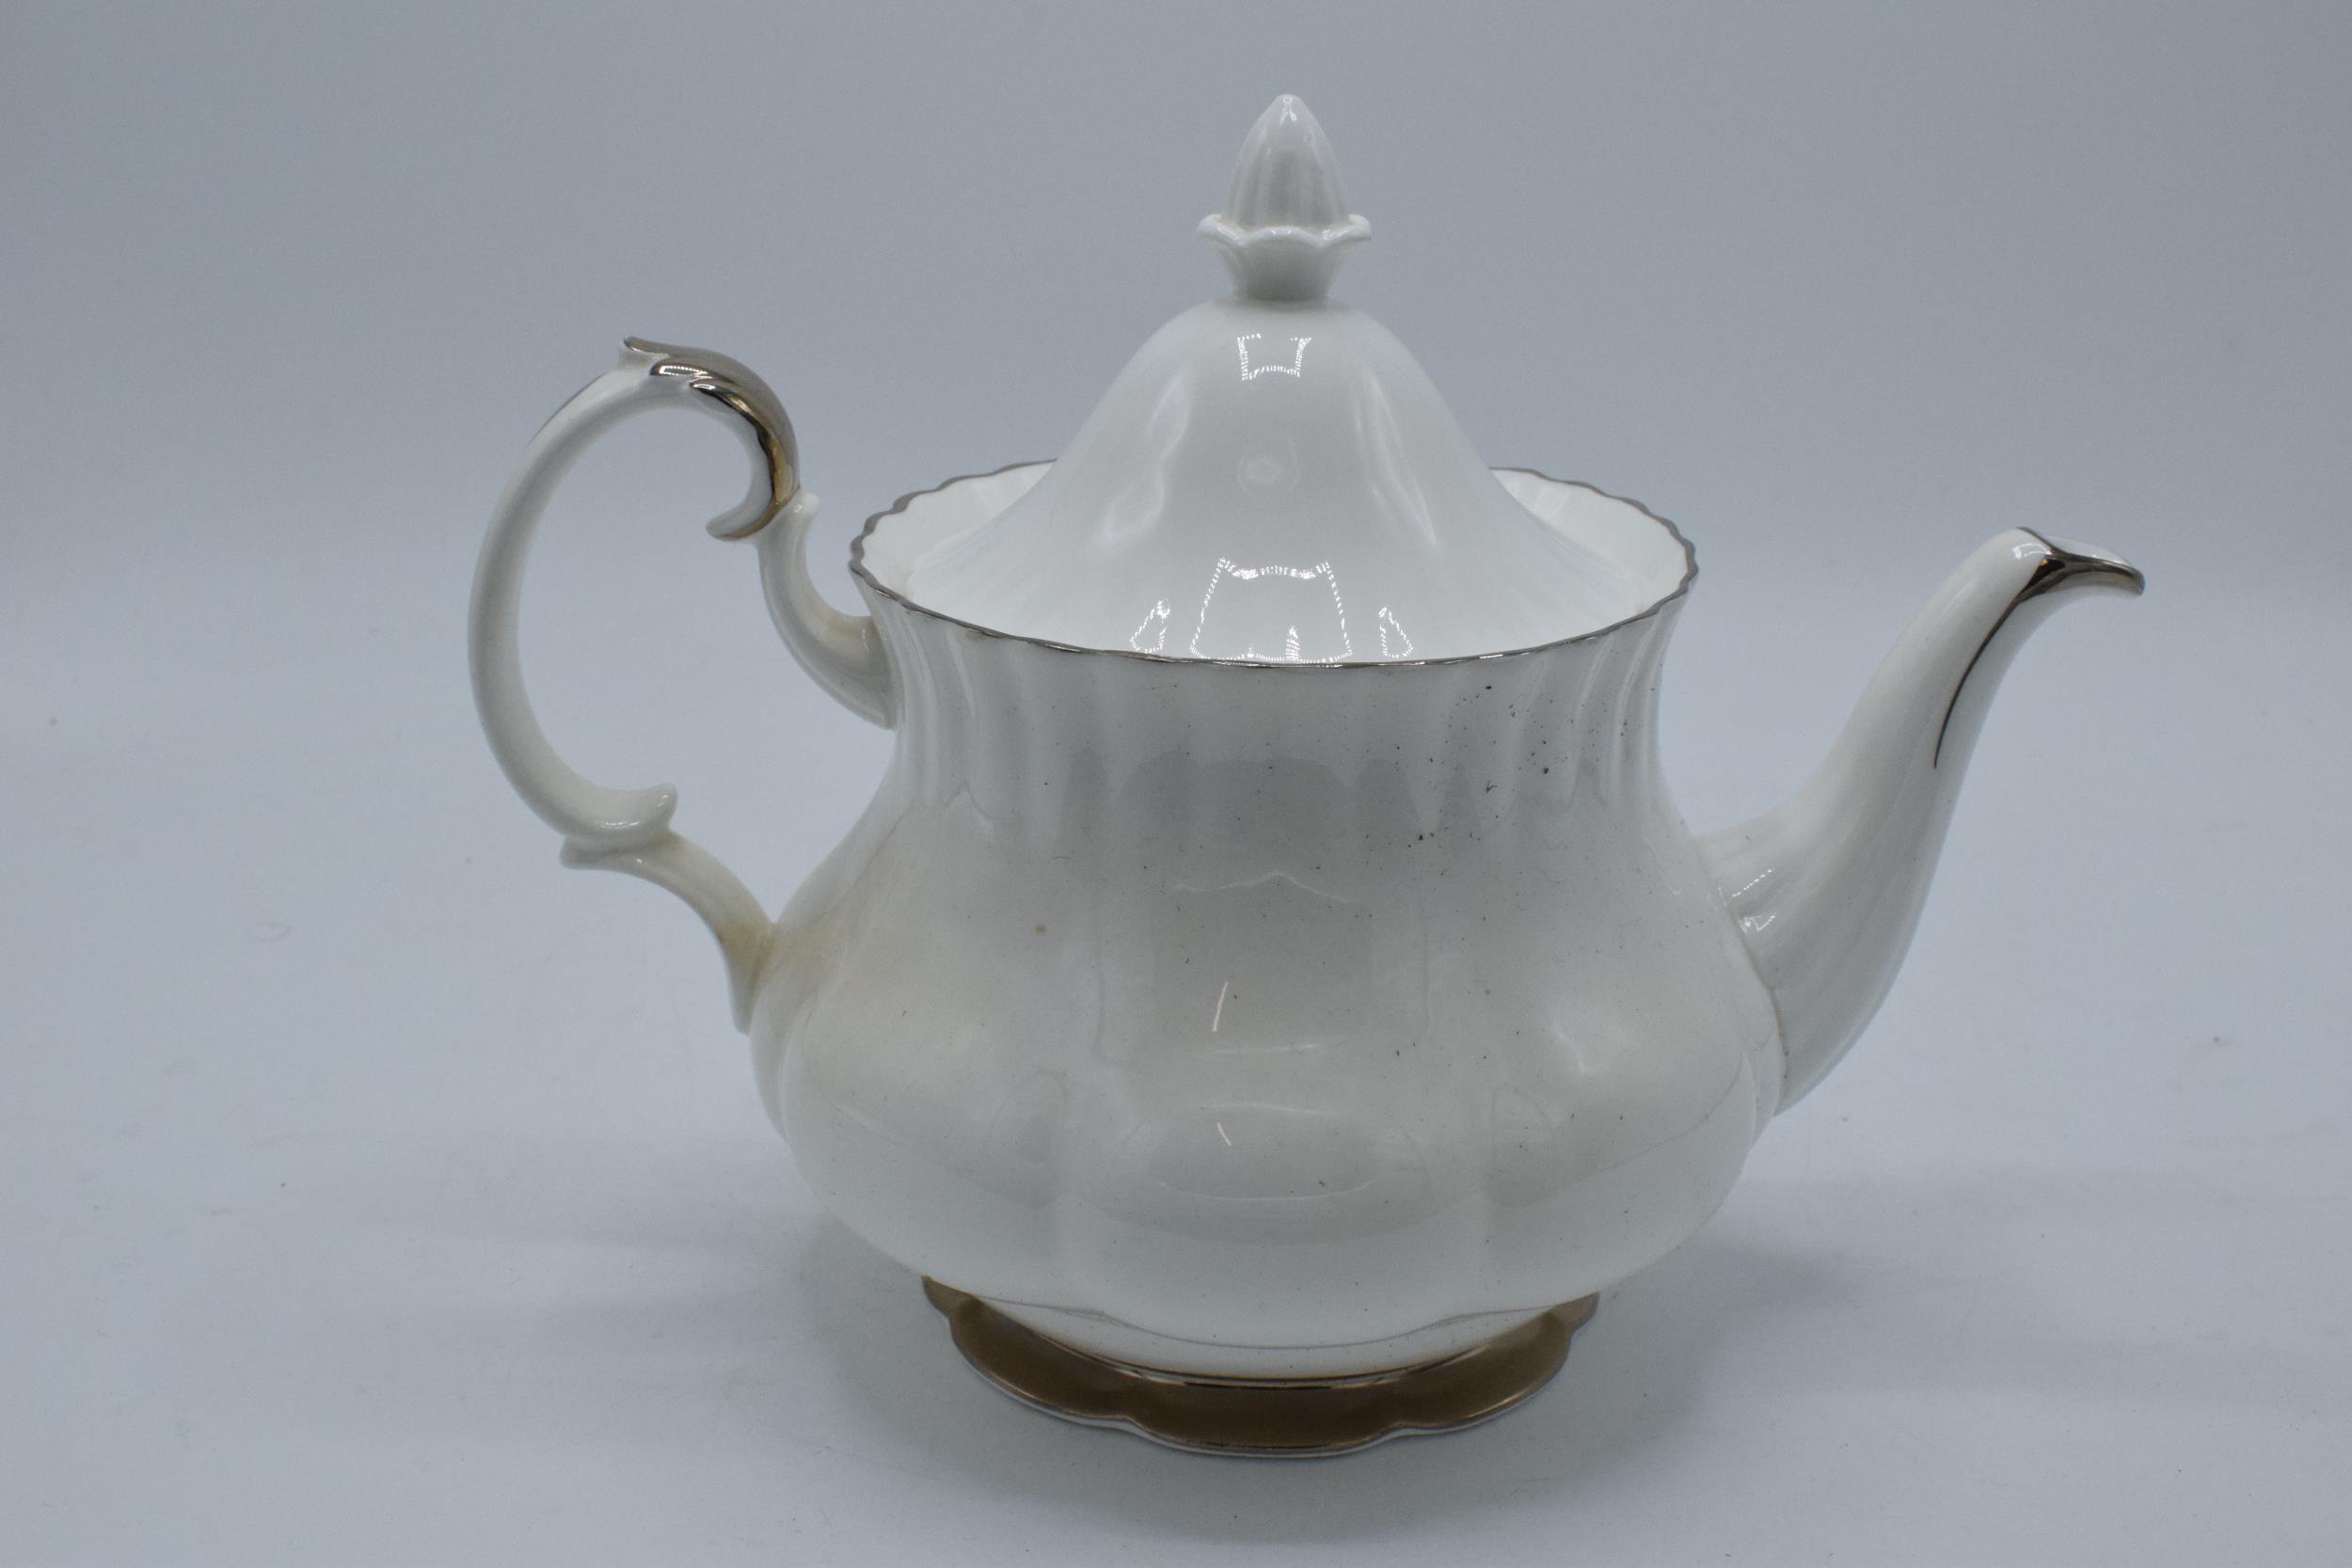 Large Royal Albert teapot in the Chantilly design In good condition with no obvious damage or - Image 2 of 3